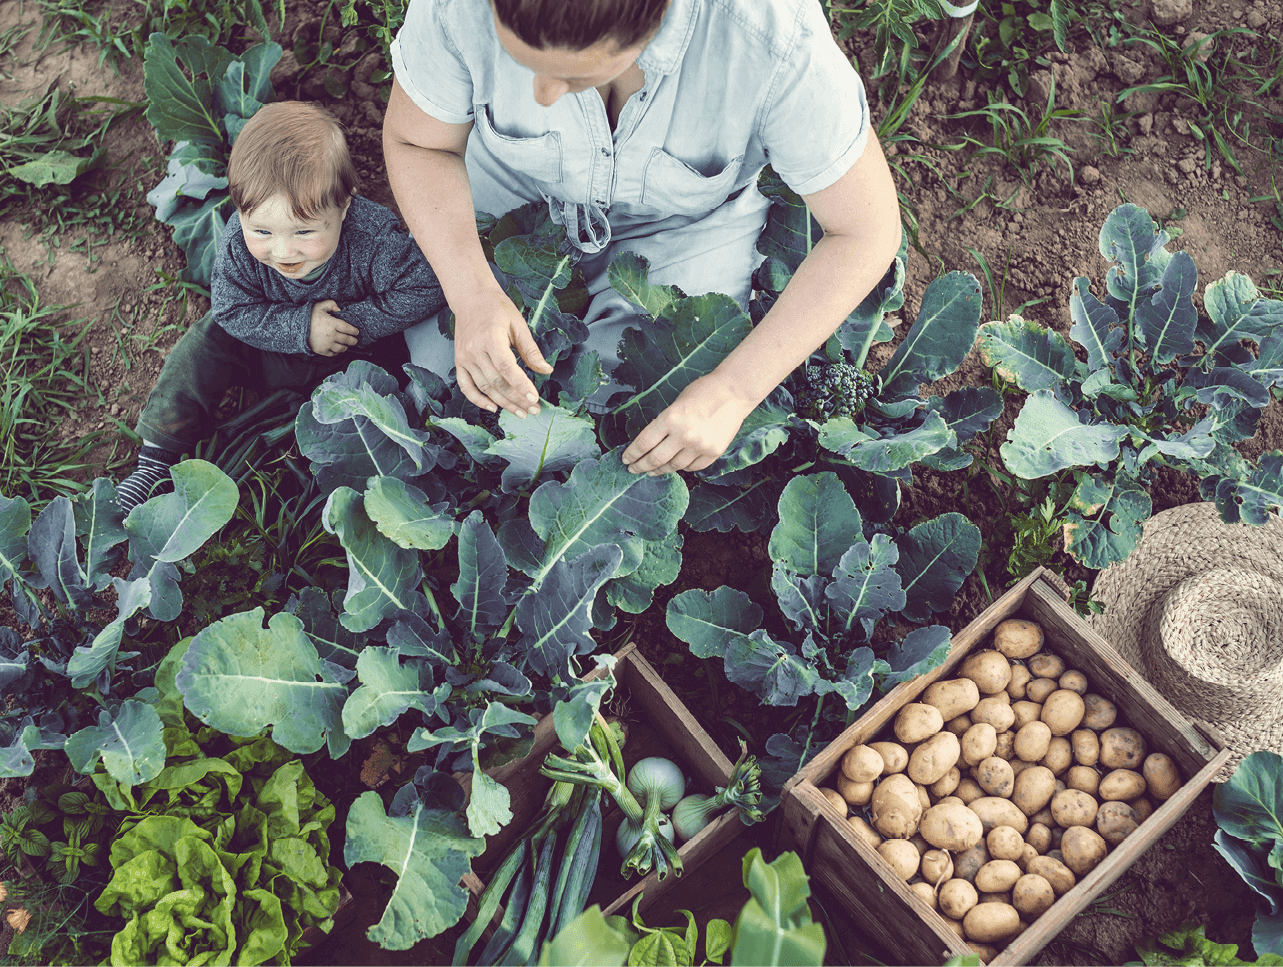 Mother and child harvesting crops